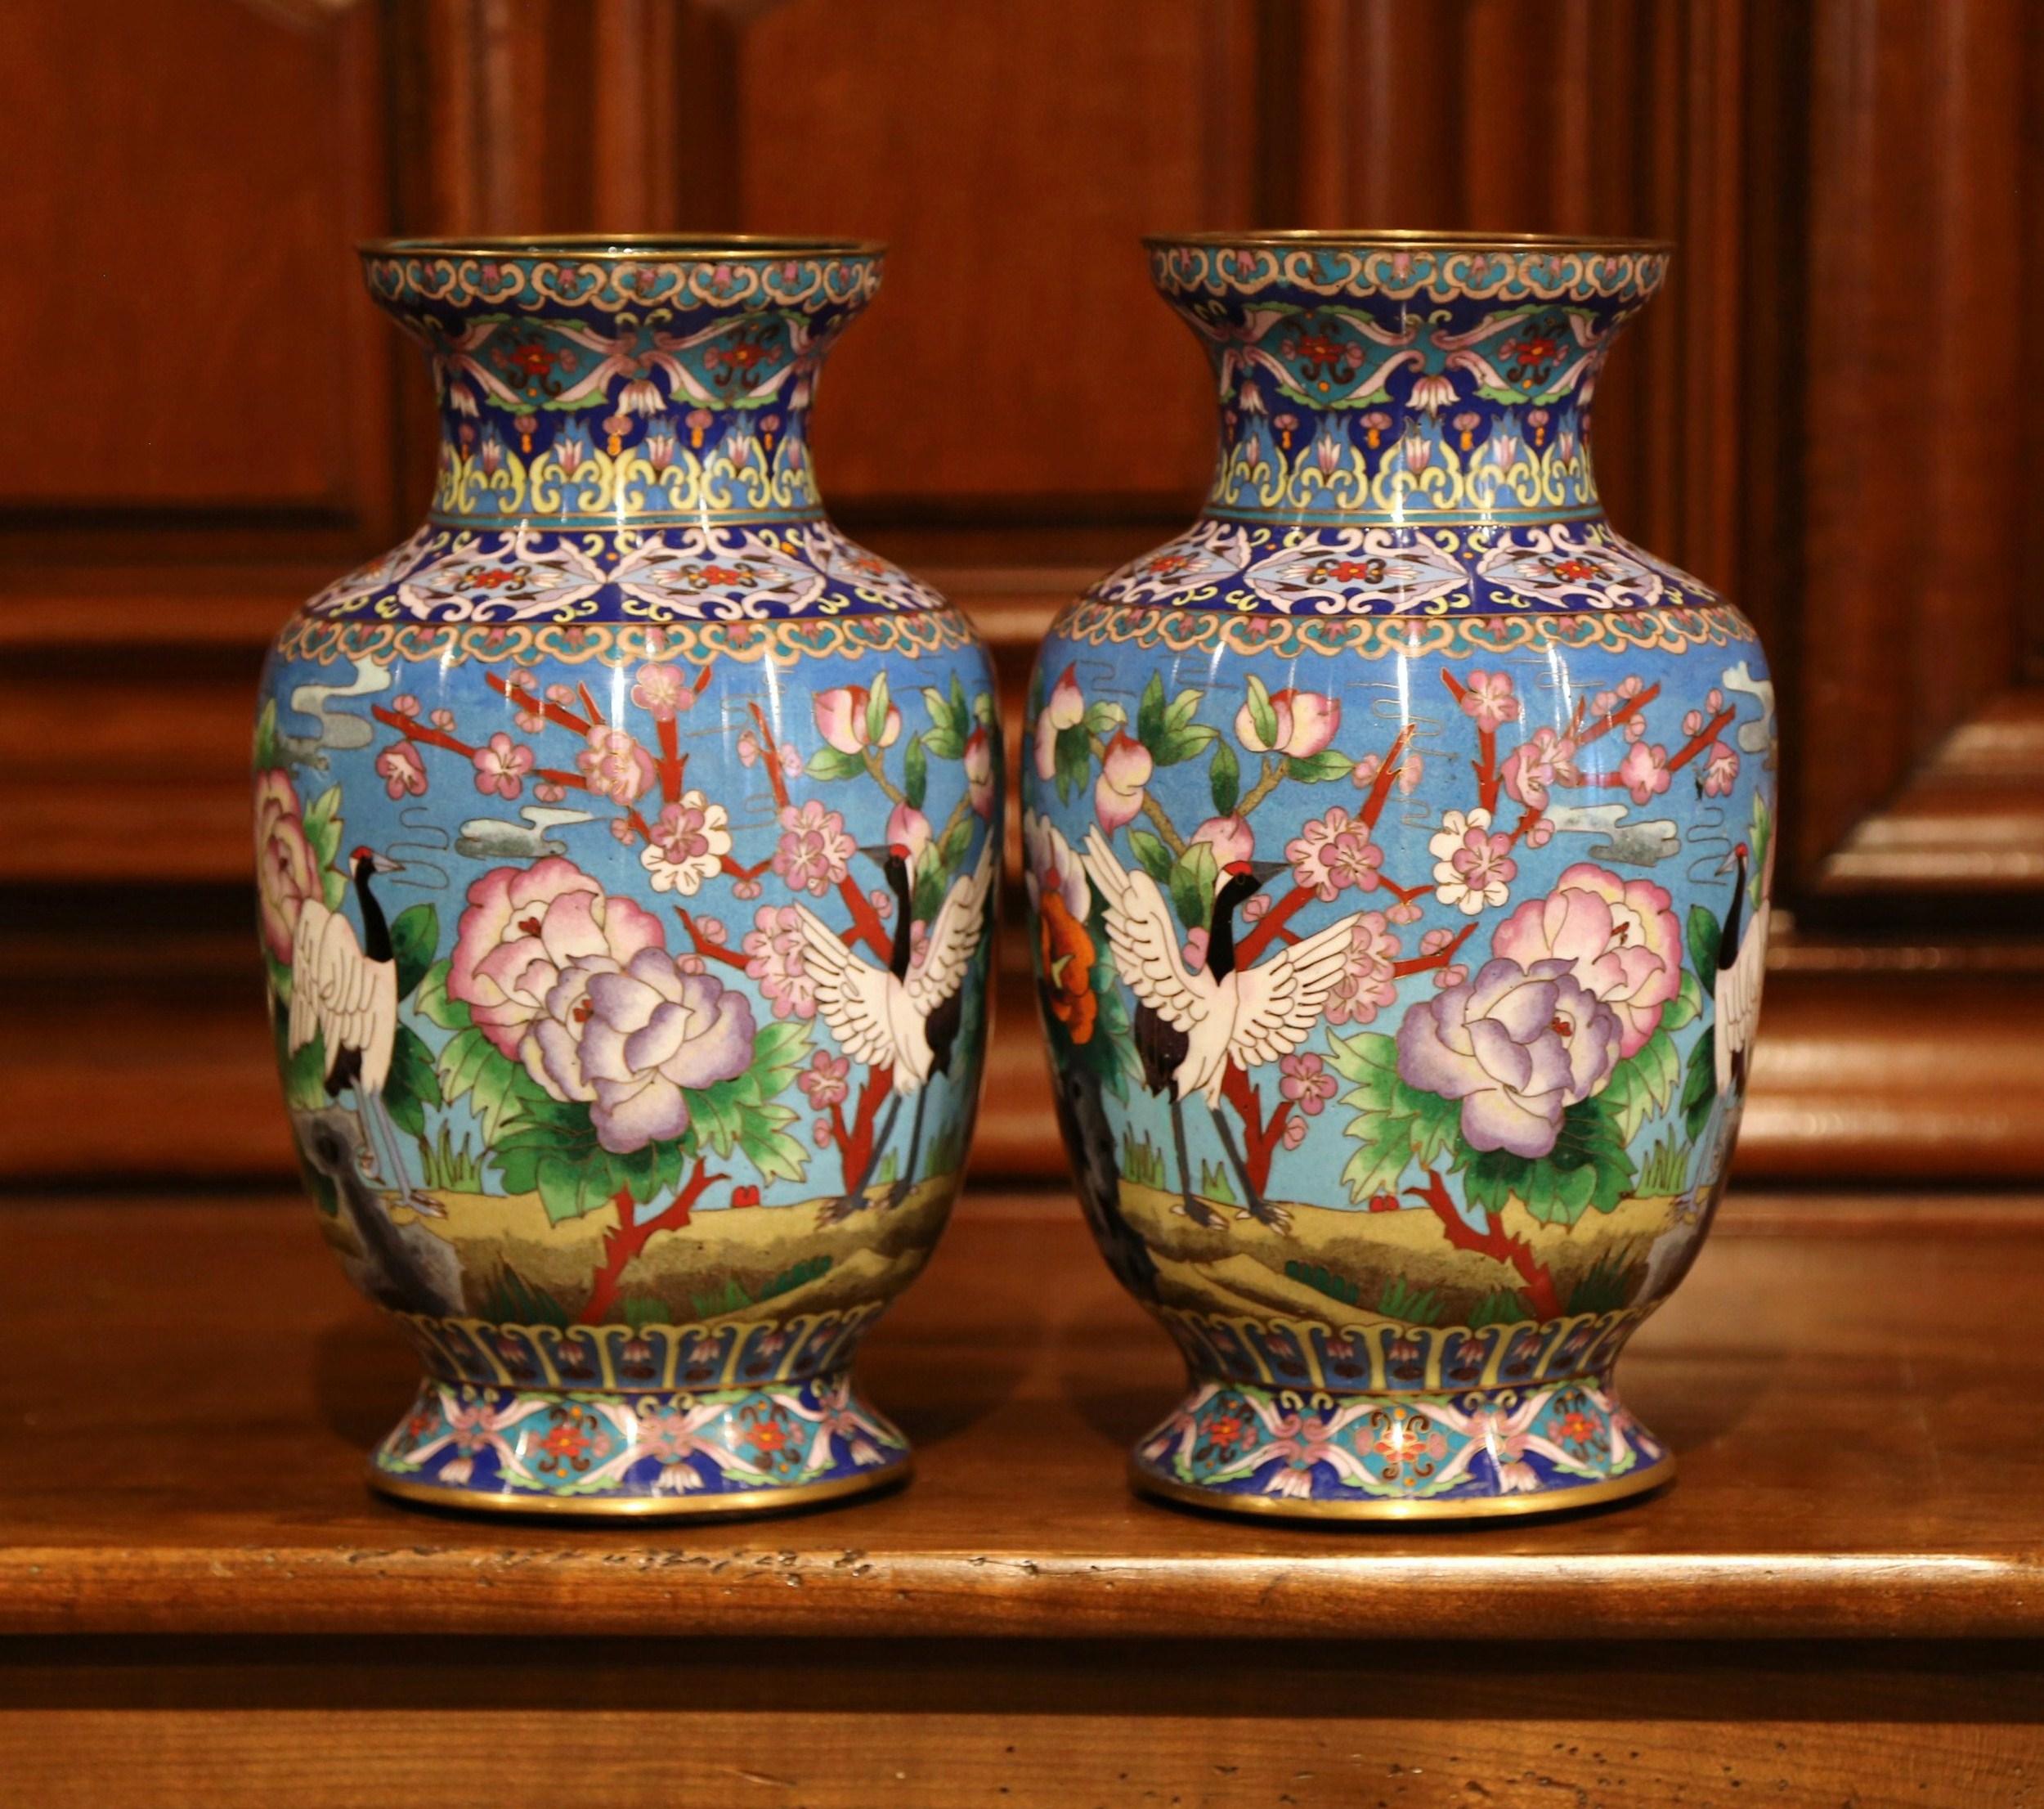 Pair of Mid-20th Century Chinese Cloisonné Vases with Bird and Floral Decor 2